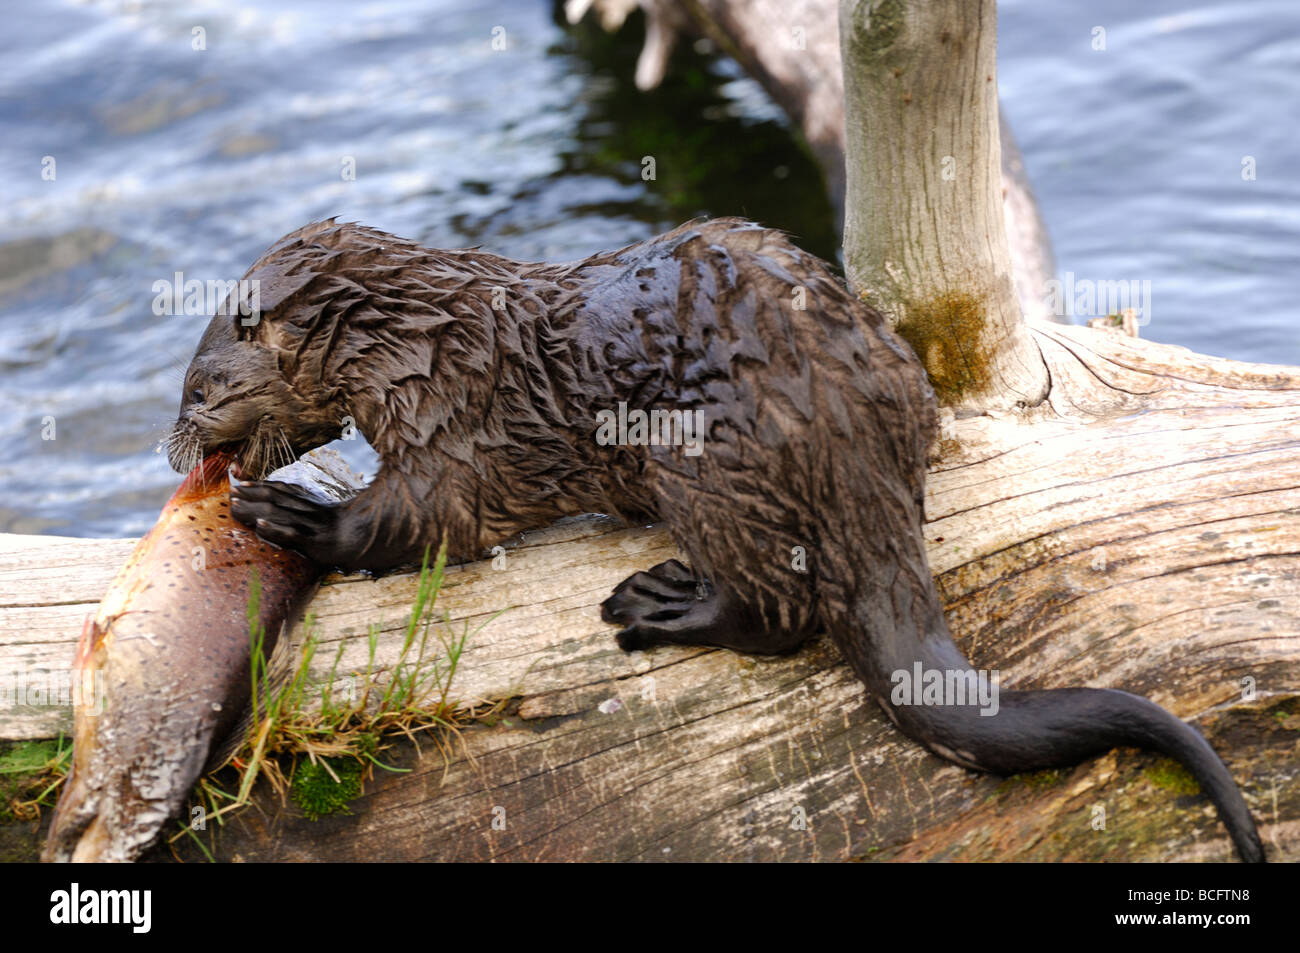 Stock photo of a river otter pup eating a trout, Yellowstone National Park, 2009. Stock Photo